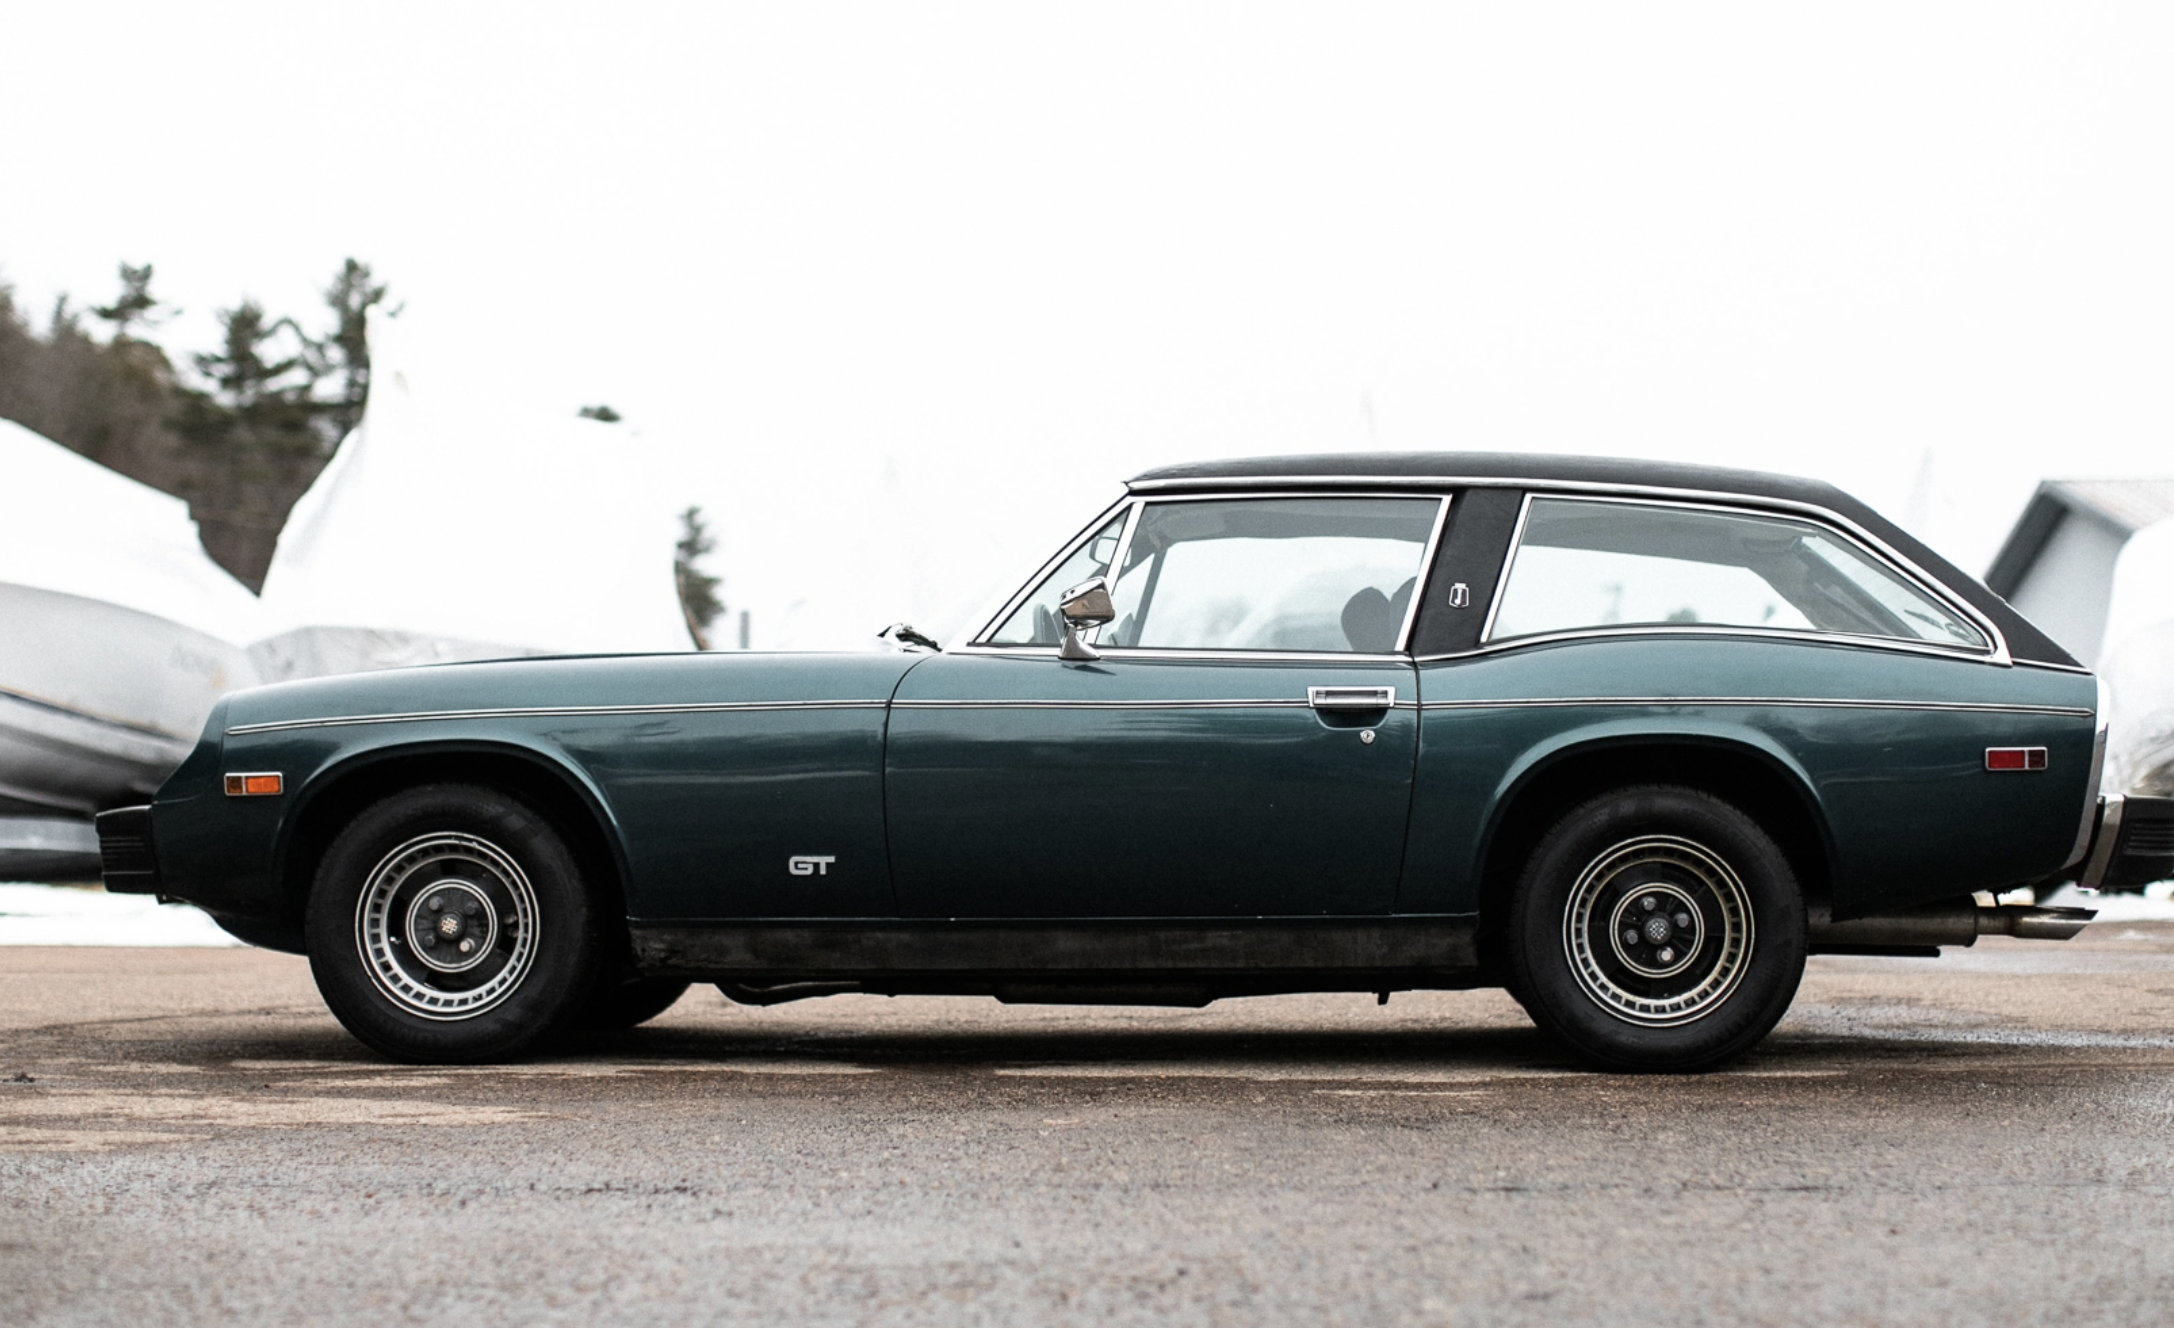 1967 Jensen GT Is Our Bring a Trailer Auction Pick of the Day